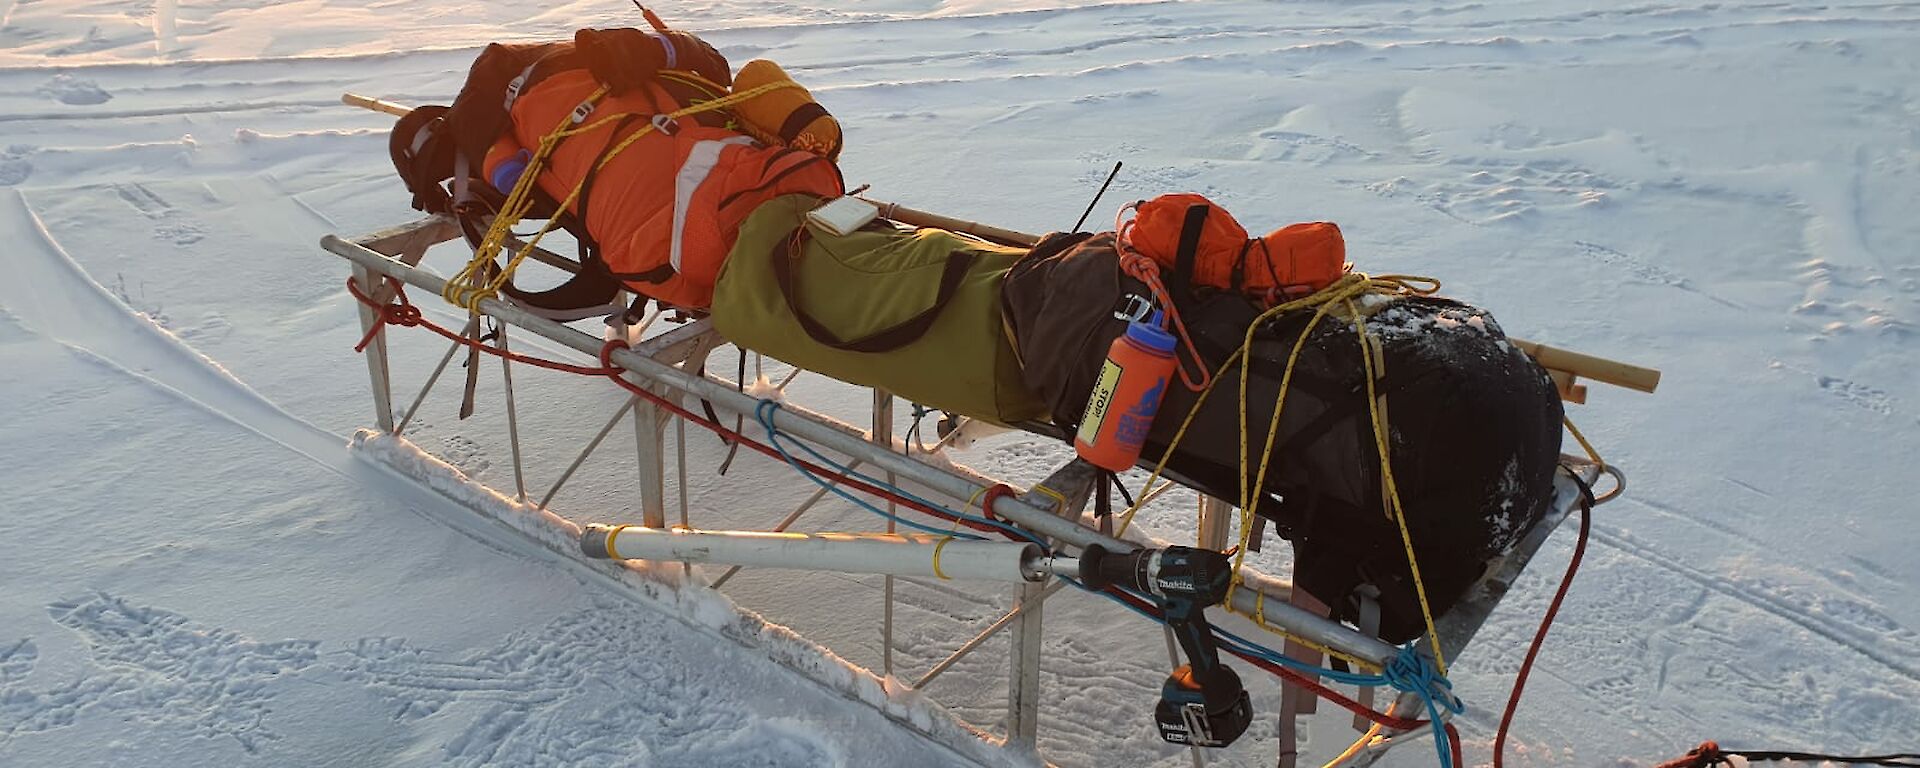 An aluminium sled carrying different coloured packs, sits on the sea-ice.